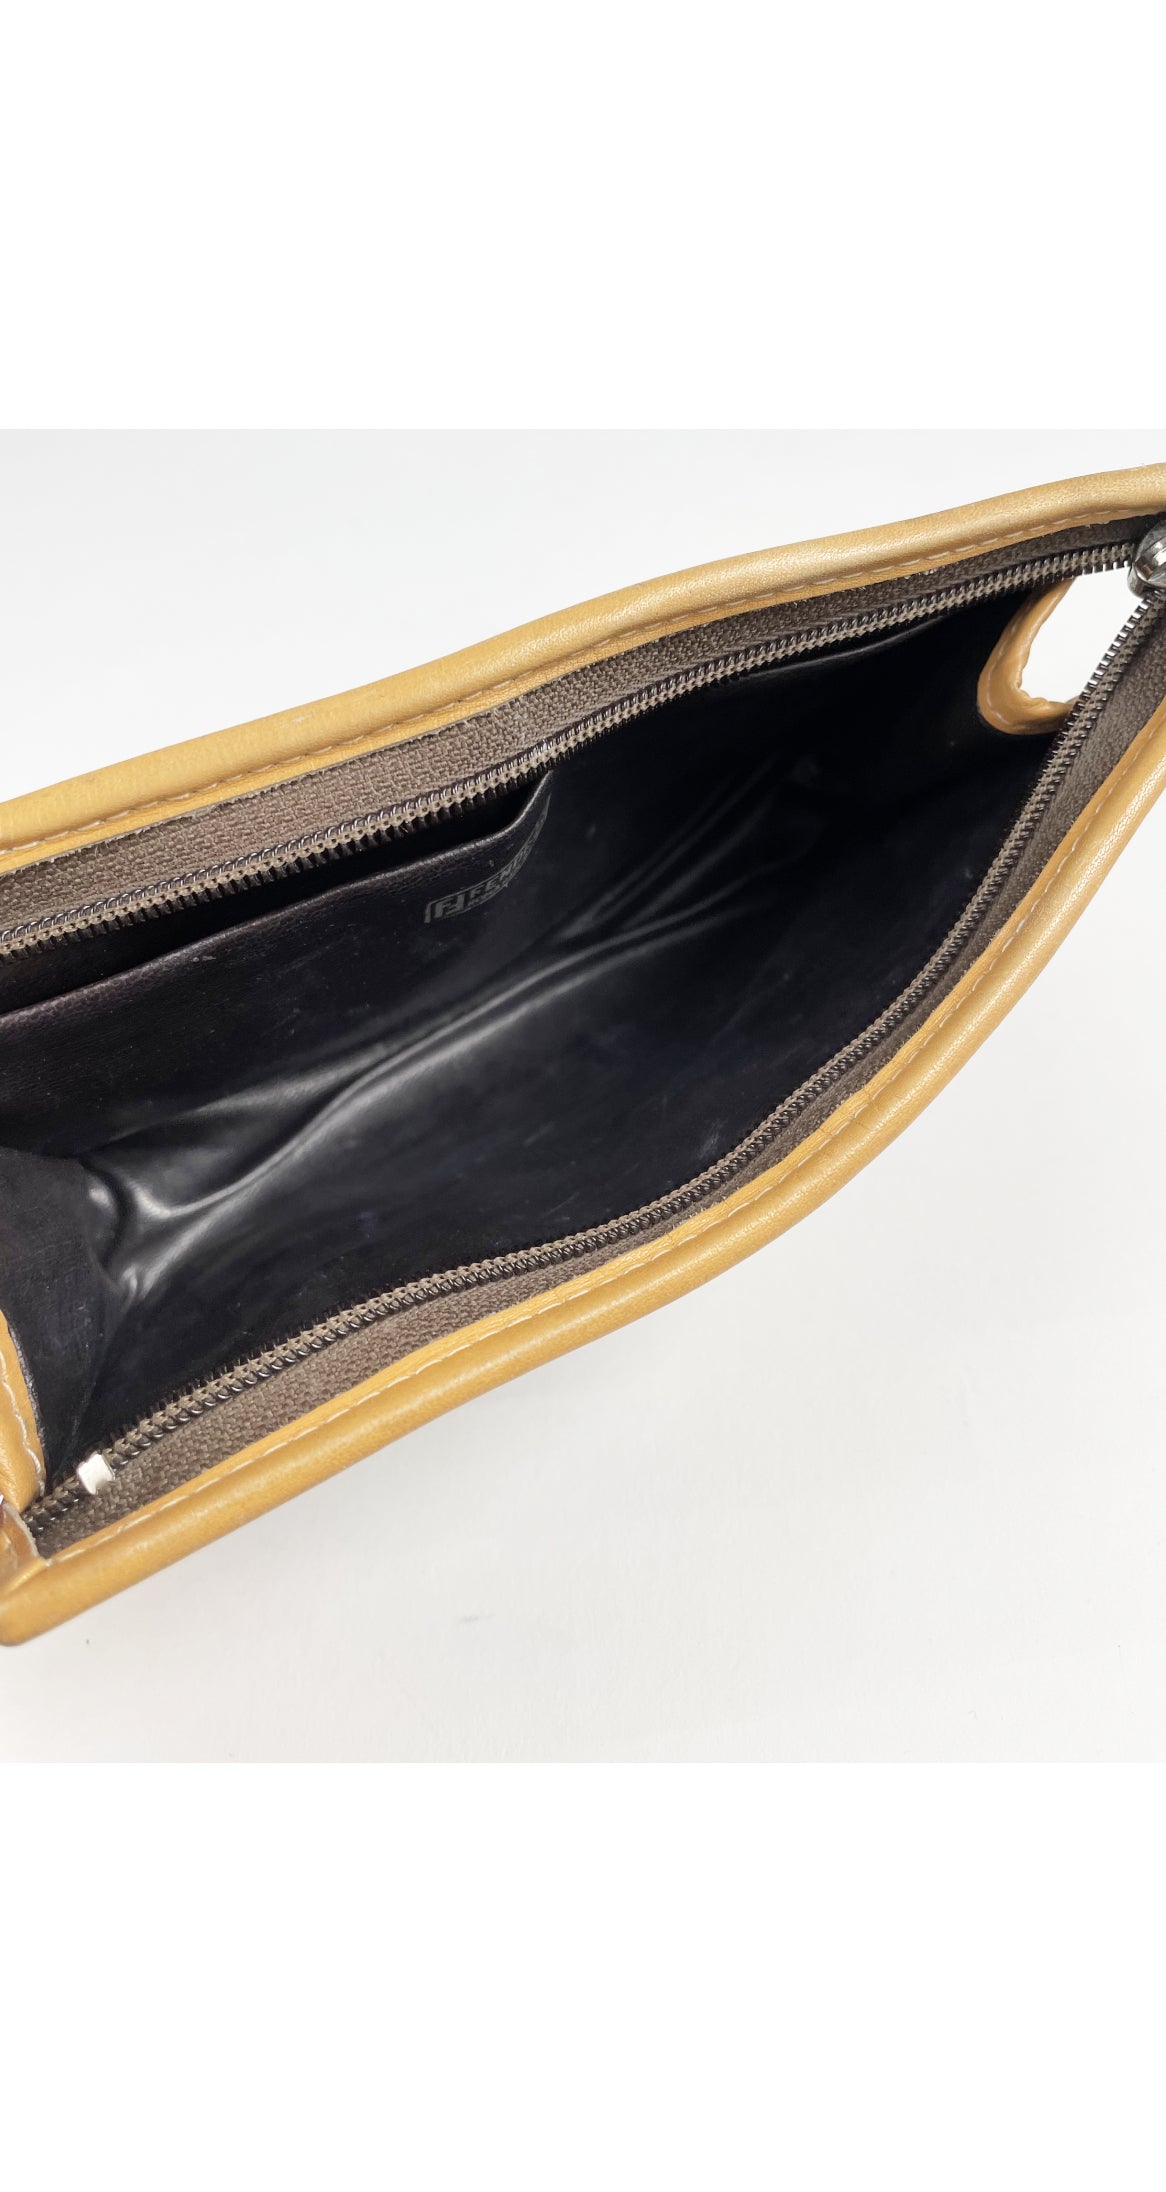 FENDI-Zucca-Print-PVC-Leather-Cosmetic-Pouch-Black-7N0074 – dct-ep_vintage  luxury Store